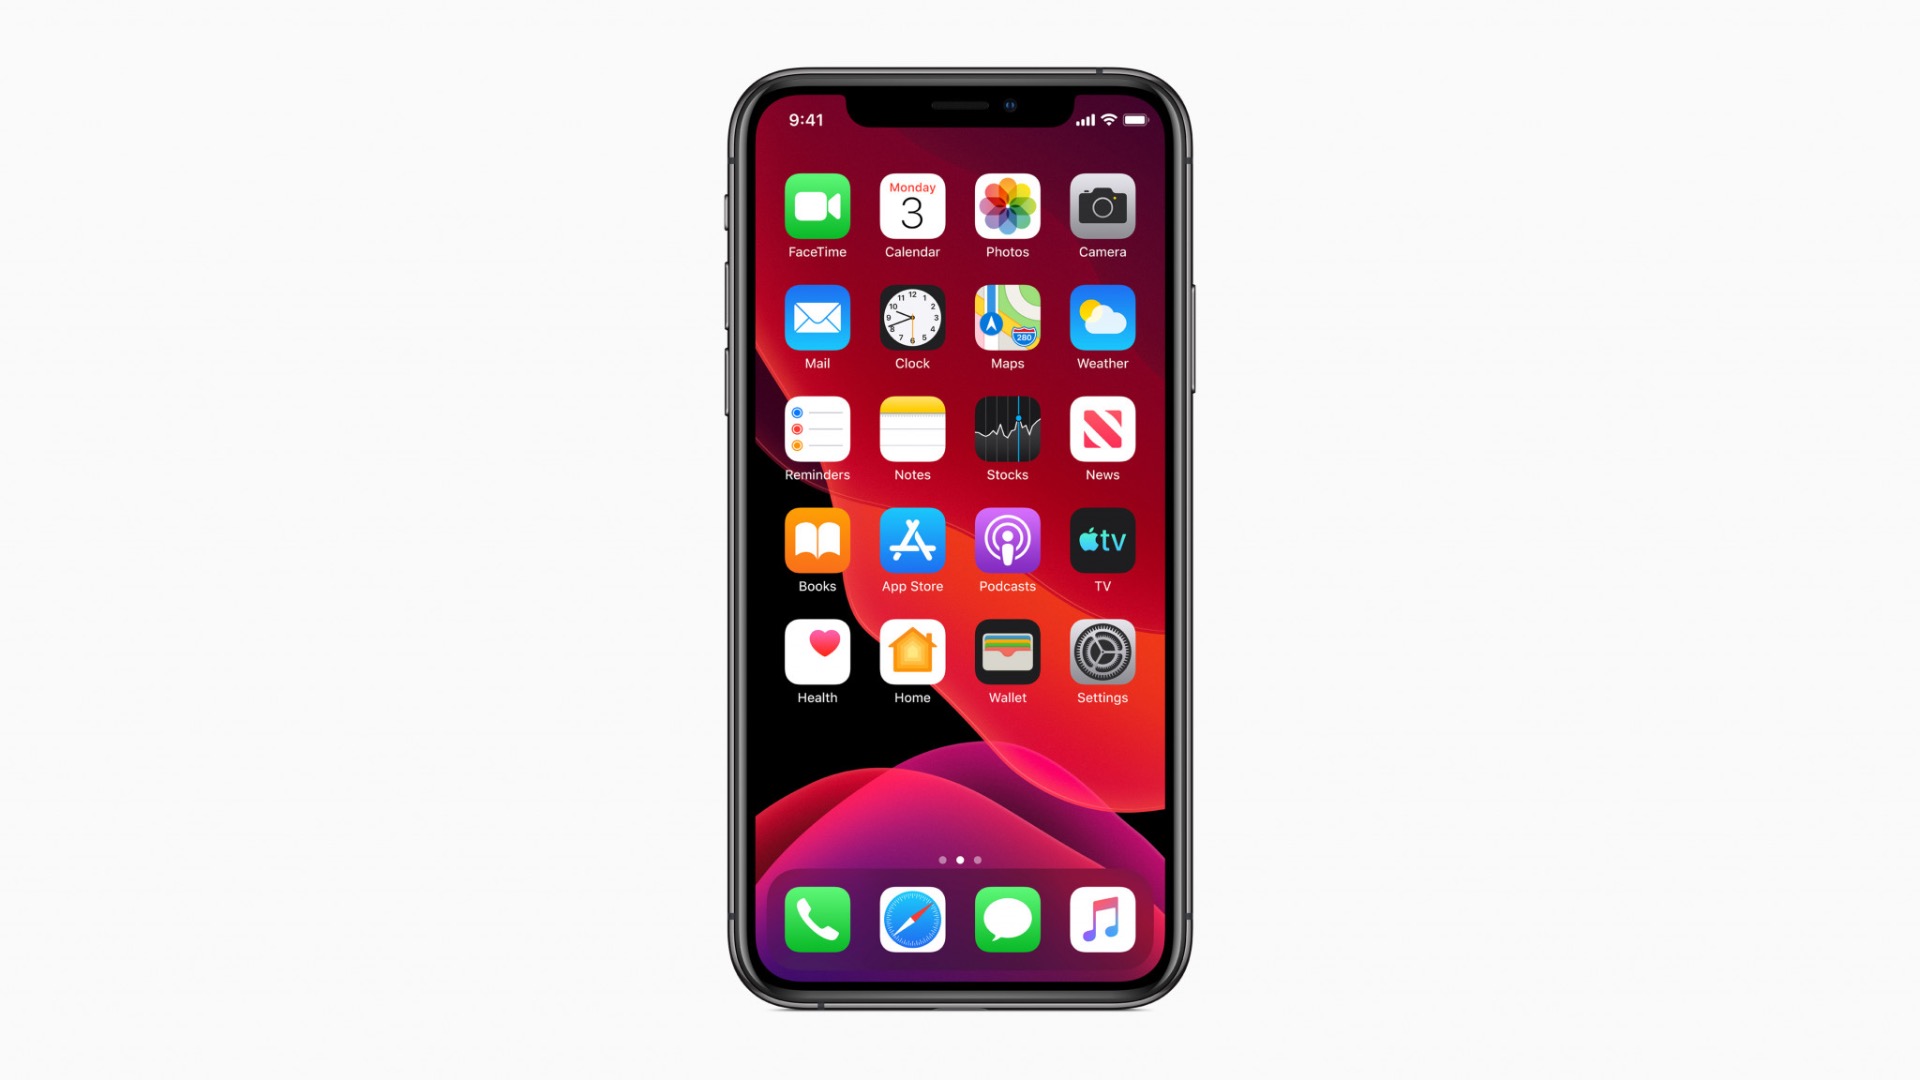 iphone xs and iOS 13